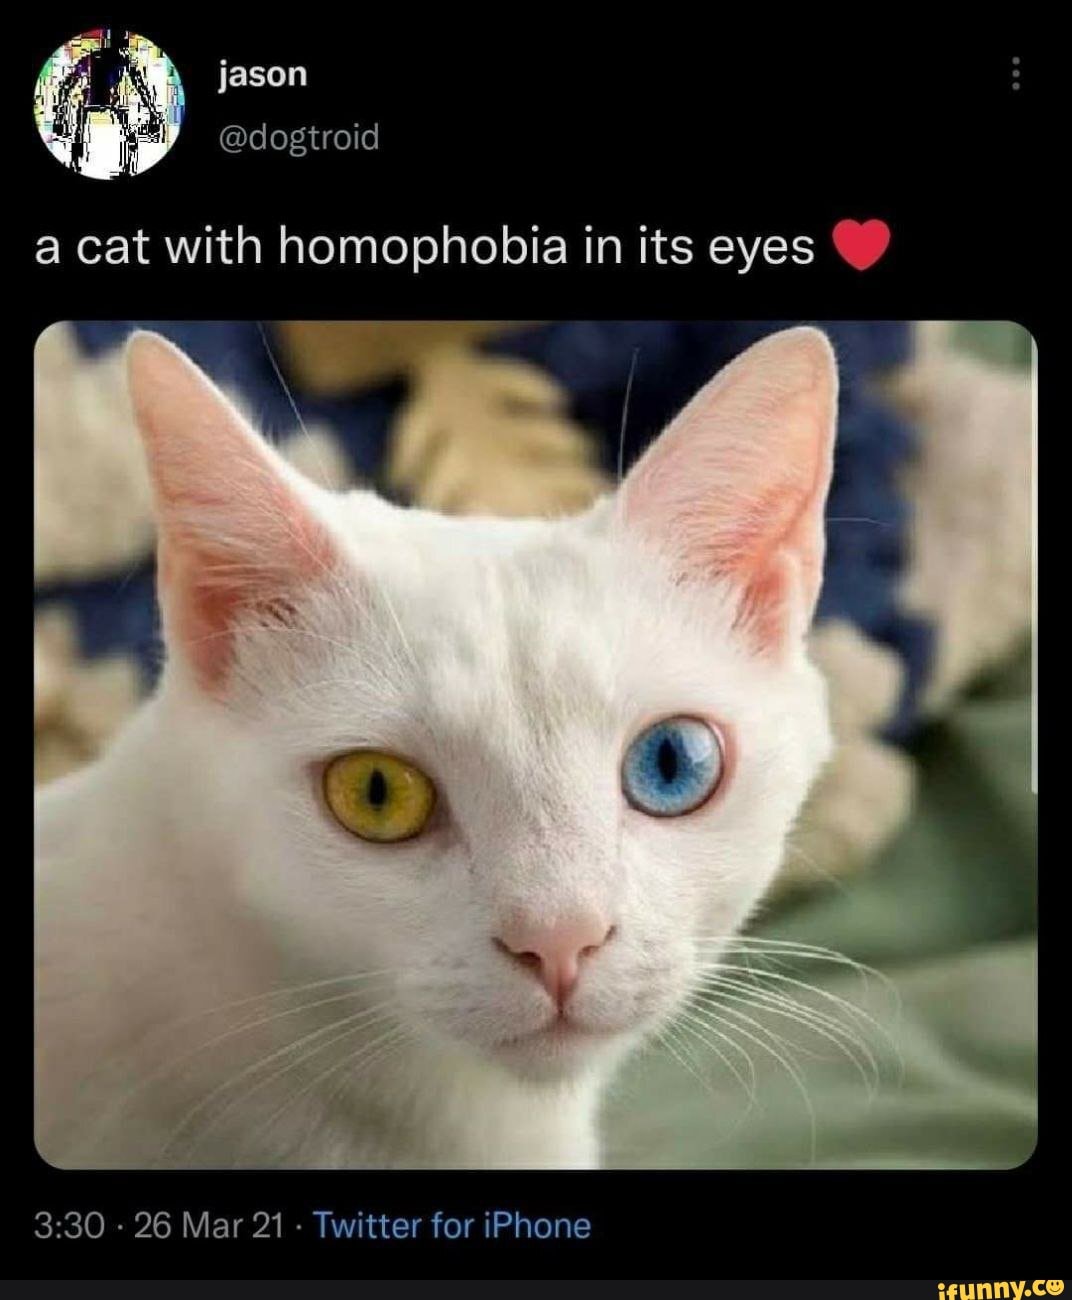 Jason @dogtroid a cat with homophobia in its eyes - 26 Mar 21 - Twitter ...